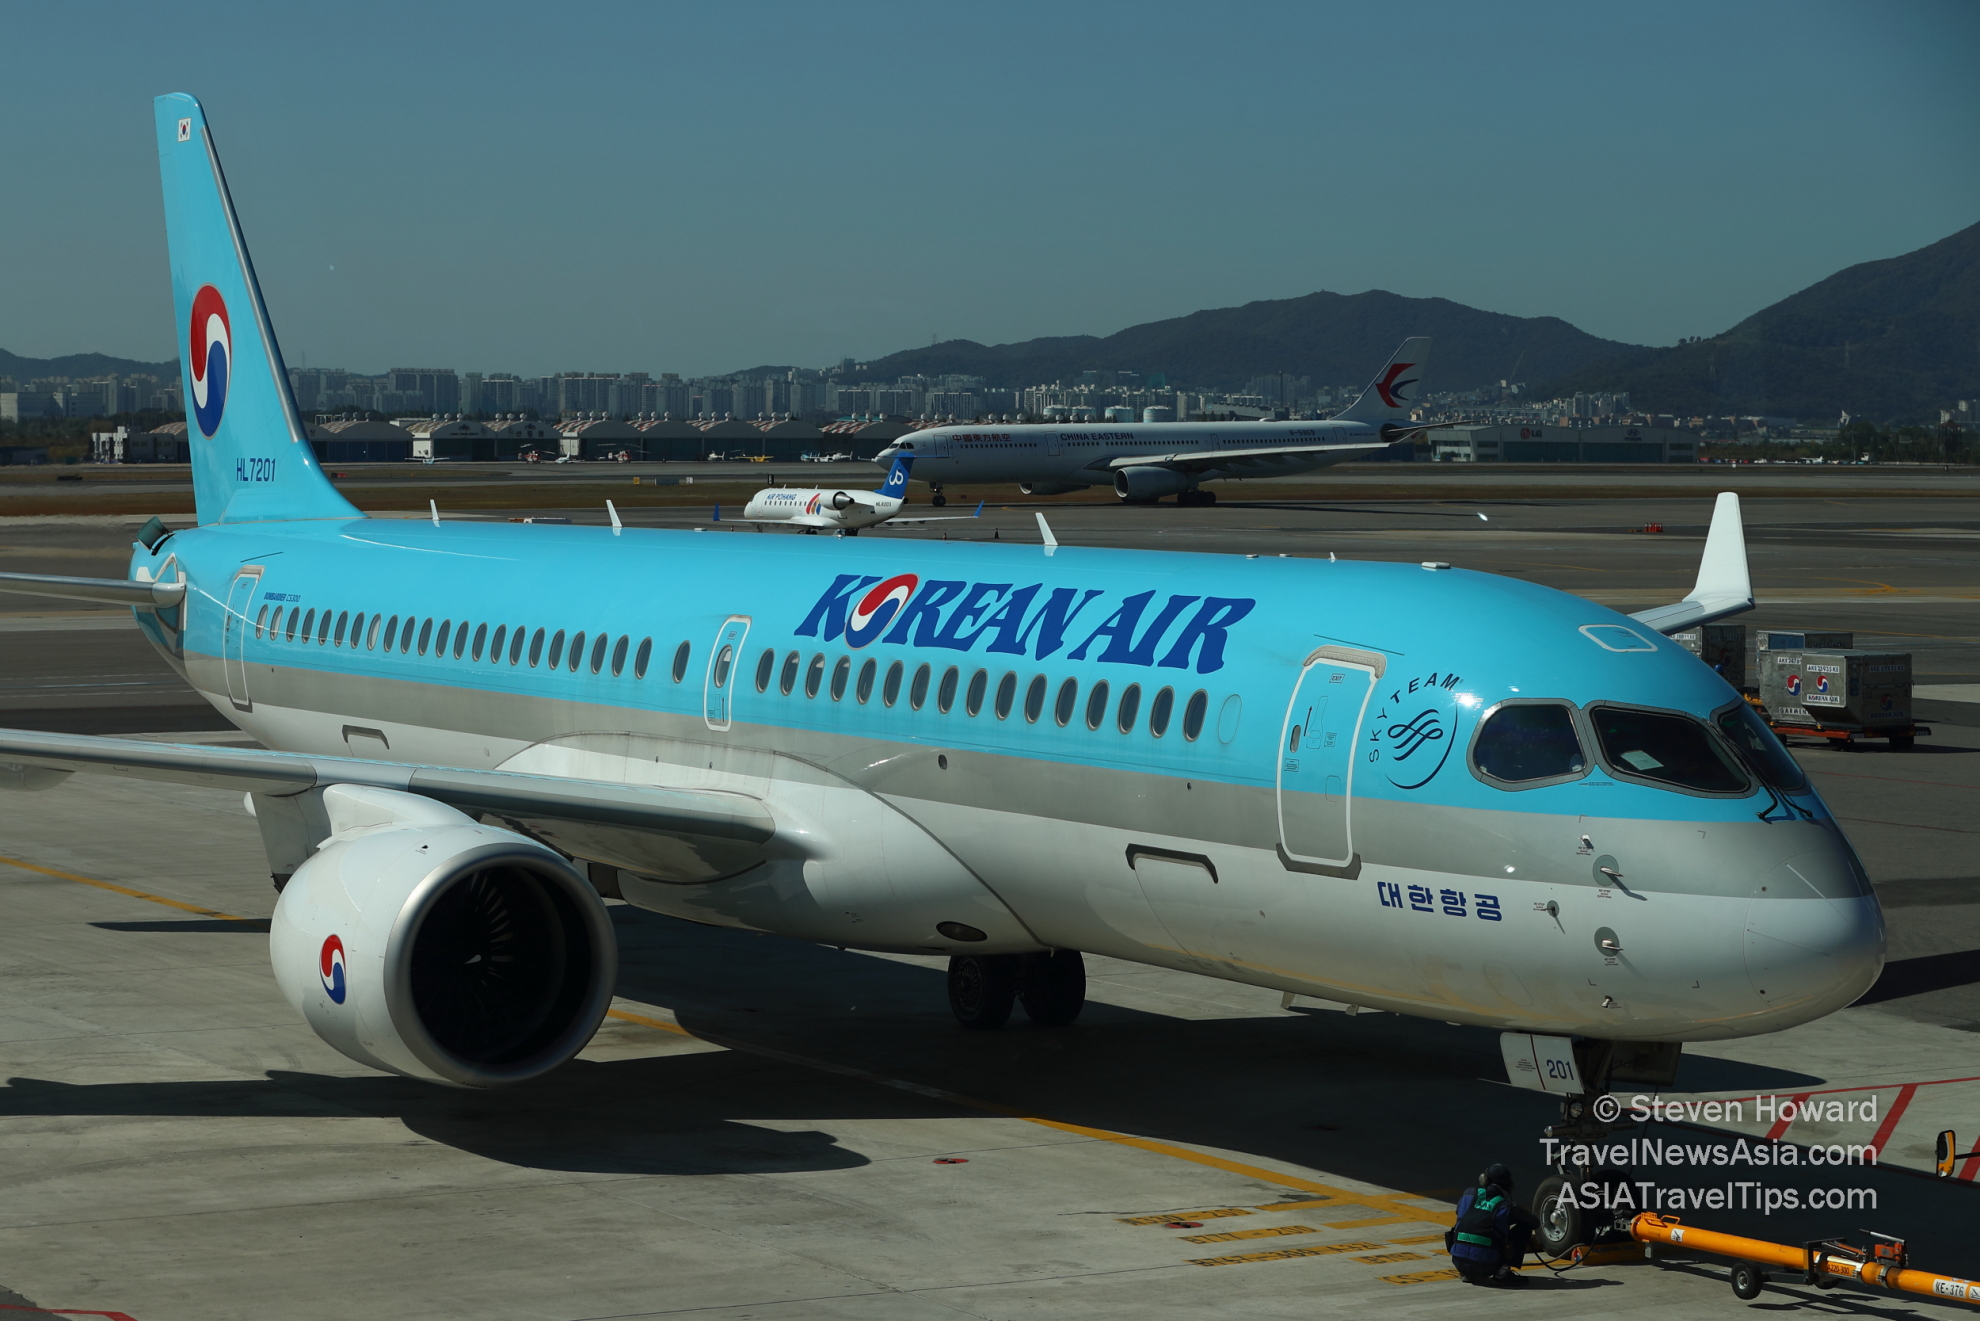 Korean Air Airbus A220-300. Picture by Steven Howard of TravelNewsAsia.com Click to enlarge.